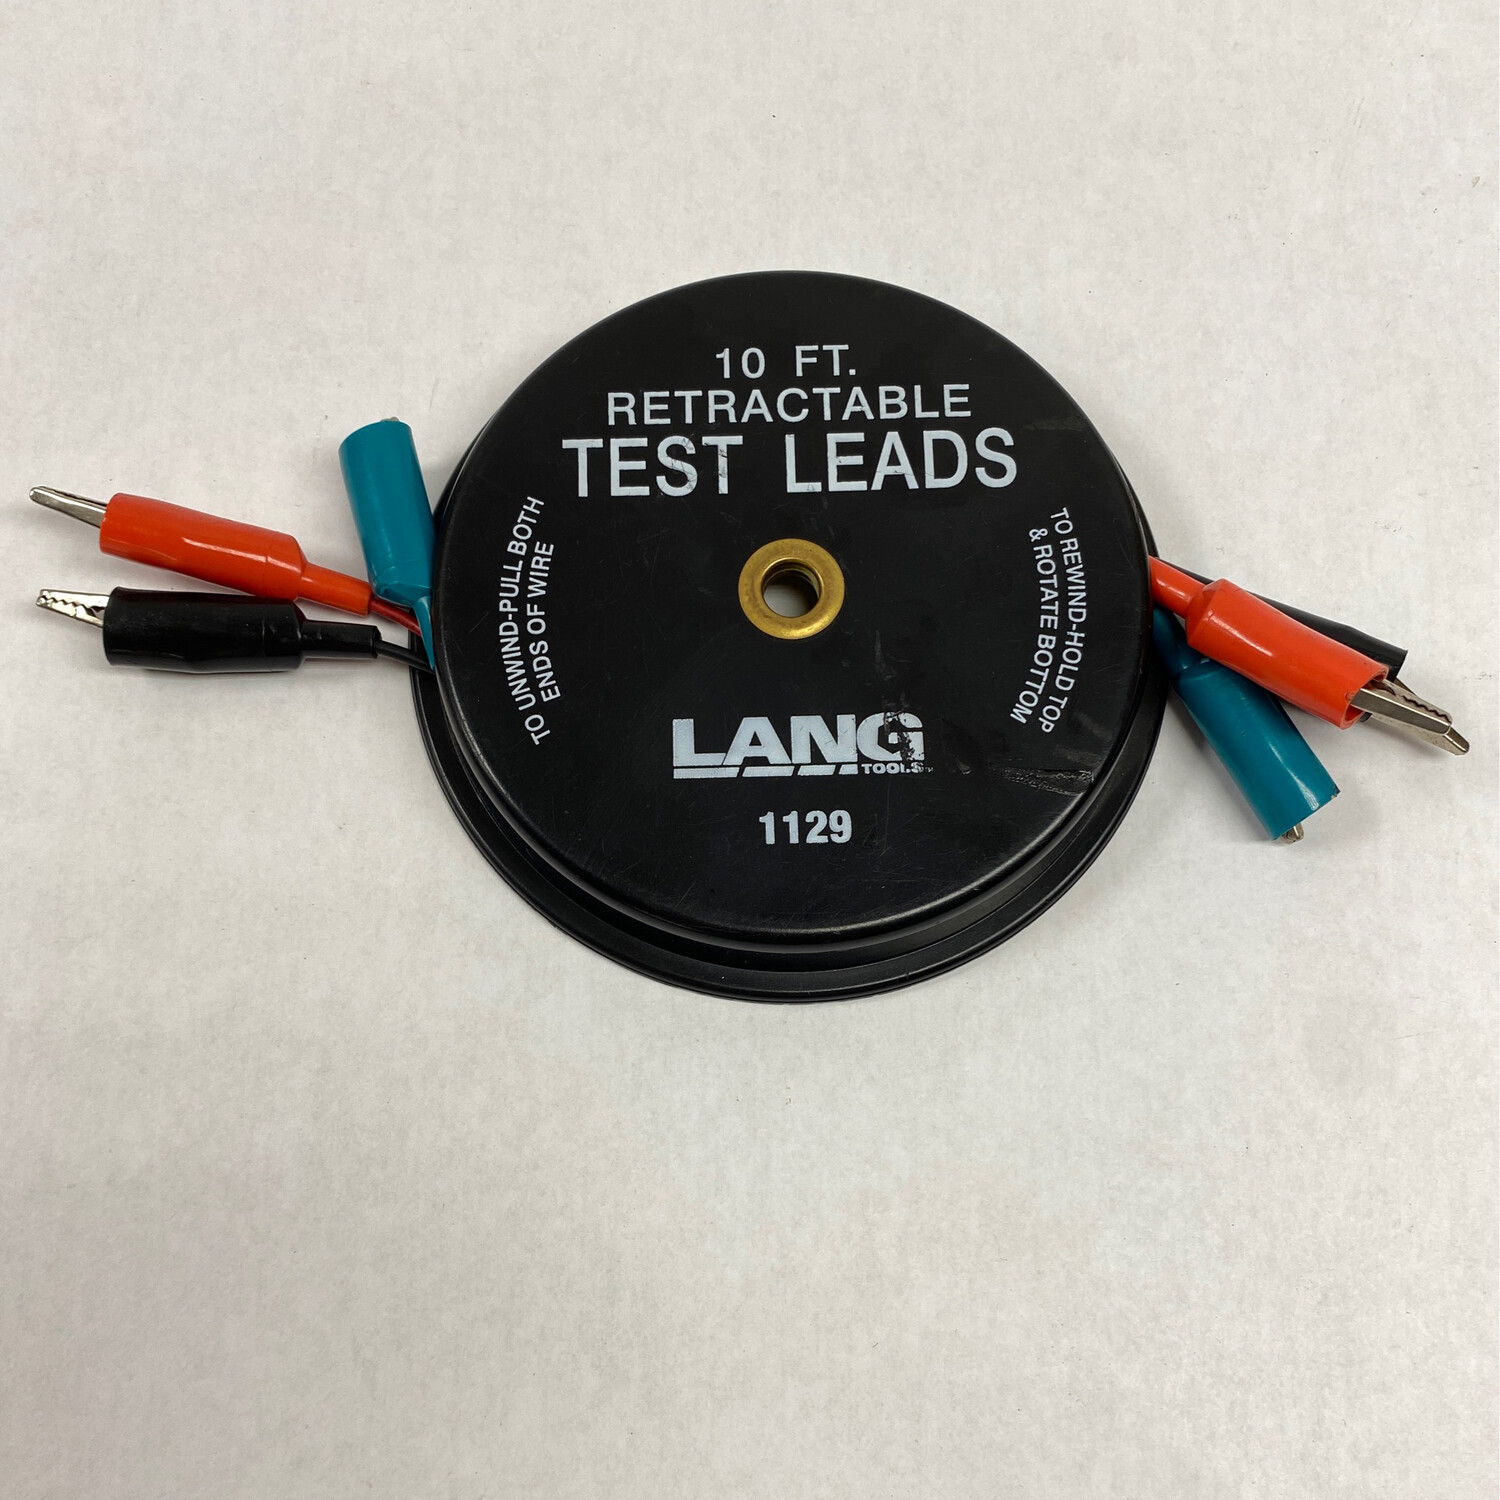 Lang Kastar 1129 Retractable Test Leads 3 Leads x 10 ft 